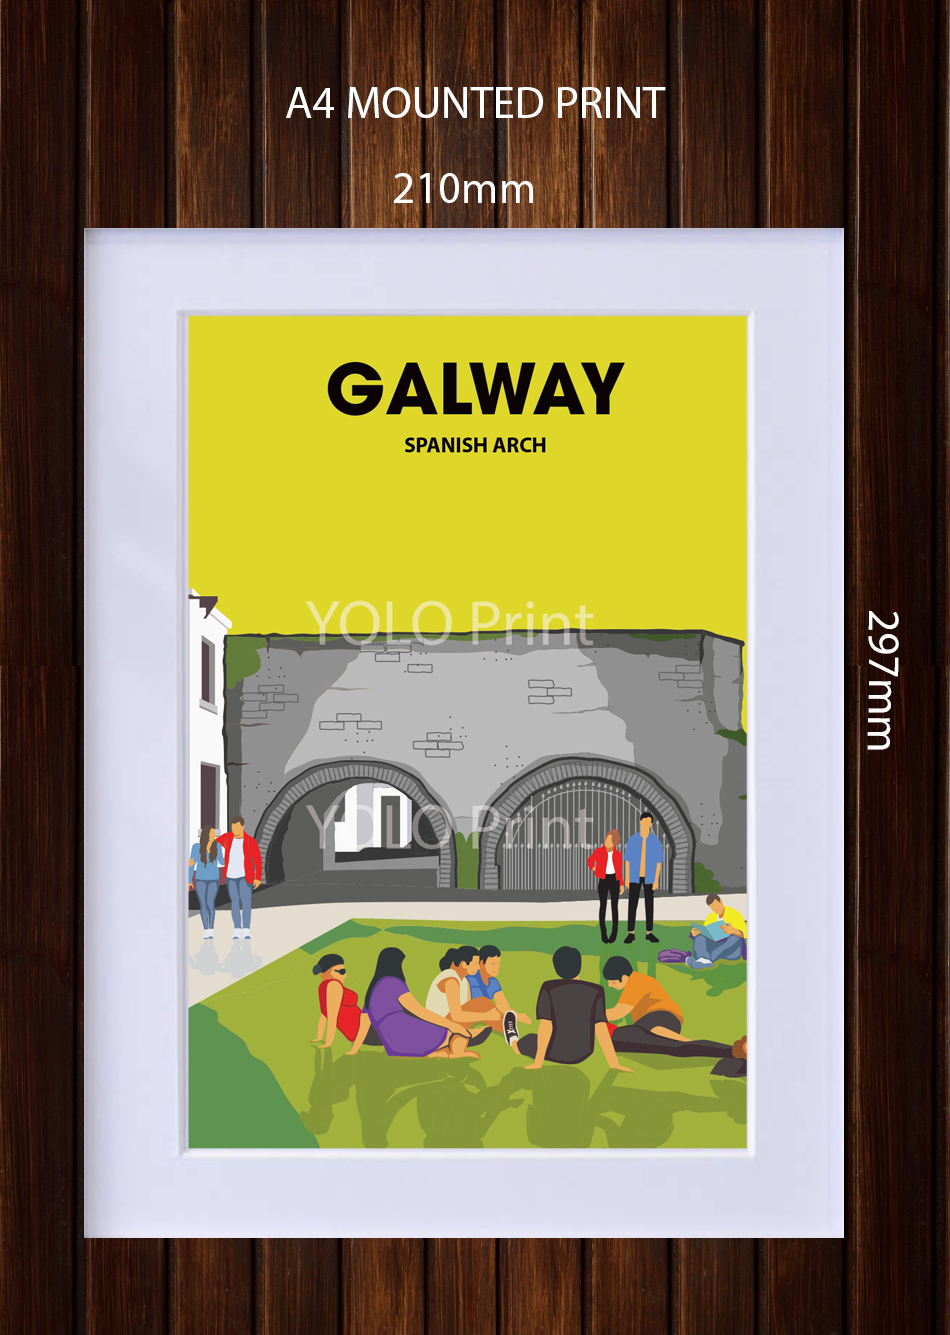 Galway Postcard or A4 Mounted Print or Fridge Magnet - Spanish Arch